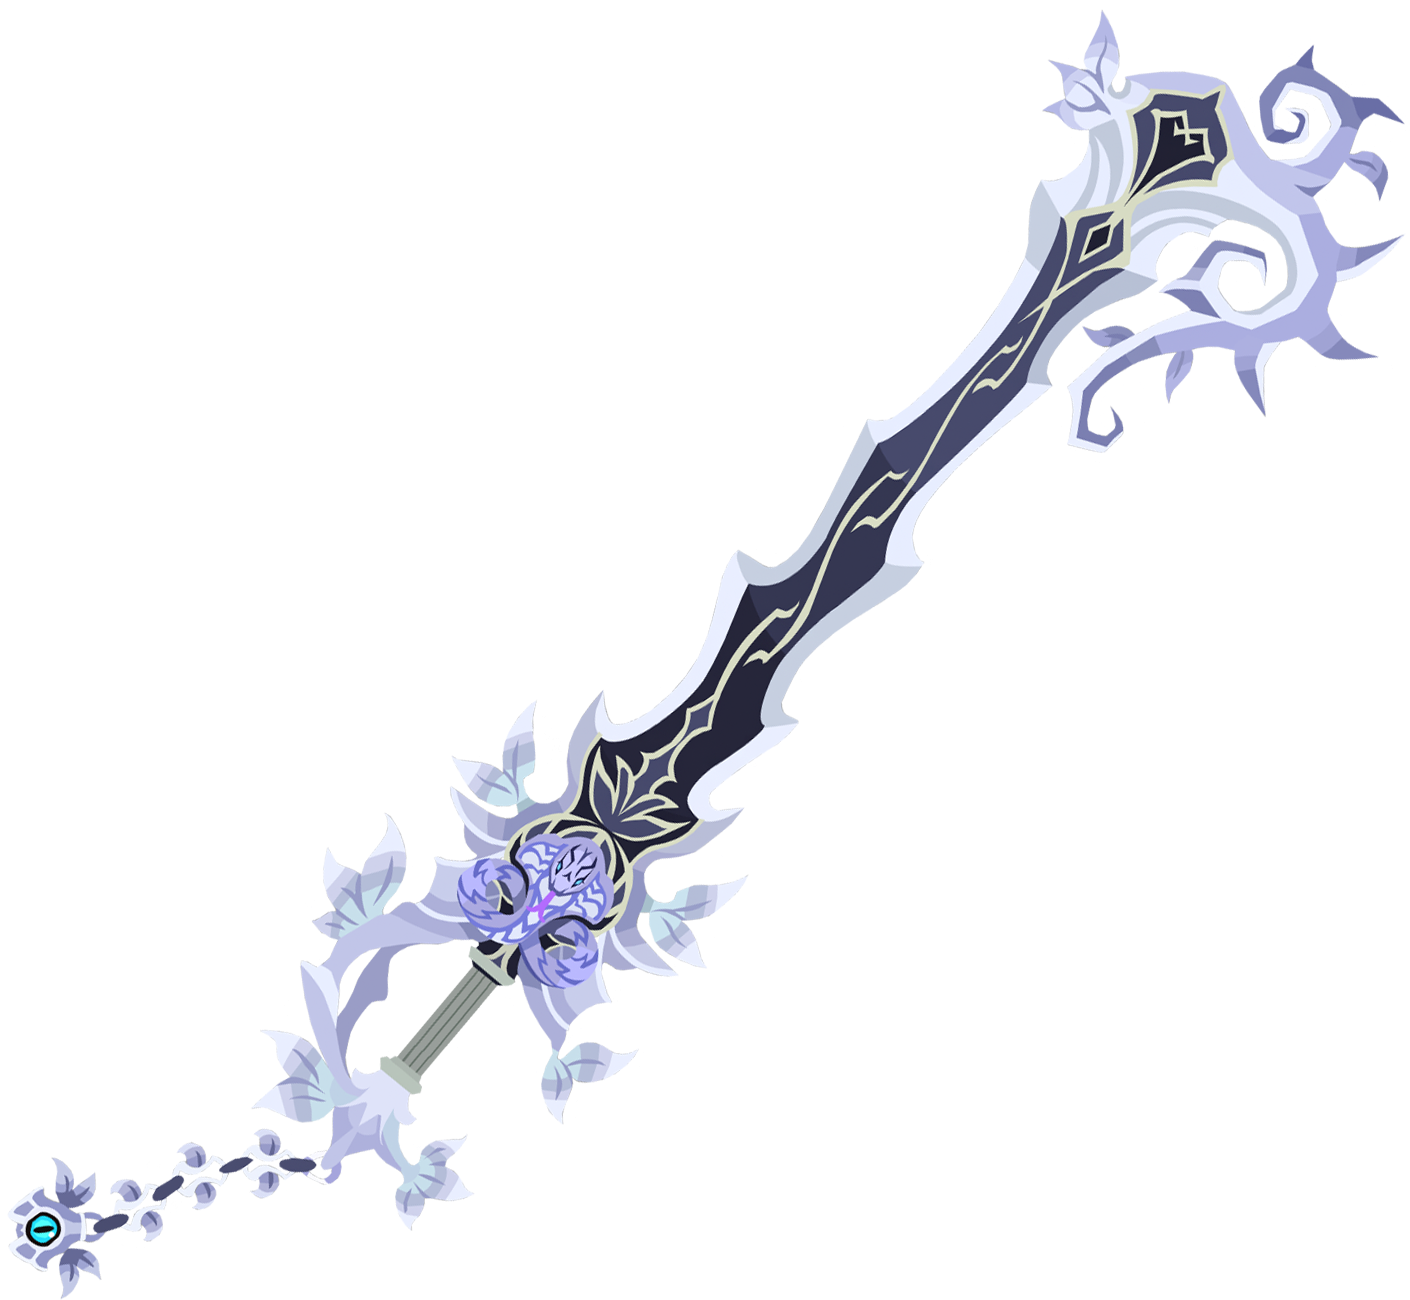 Download Http Images Khinsider Com Kingdom Hearts アクア キー ブレード Png Image With No Background Pngkey Com